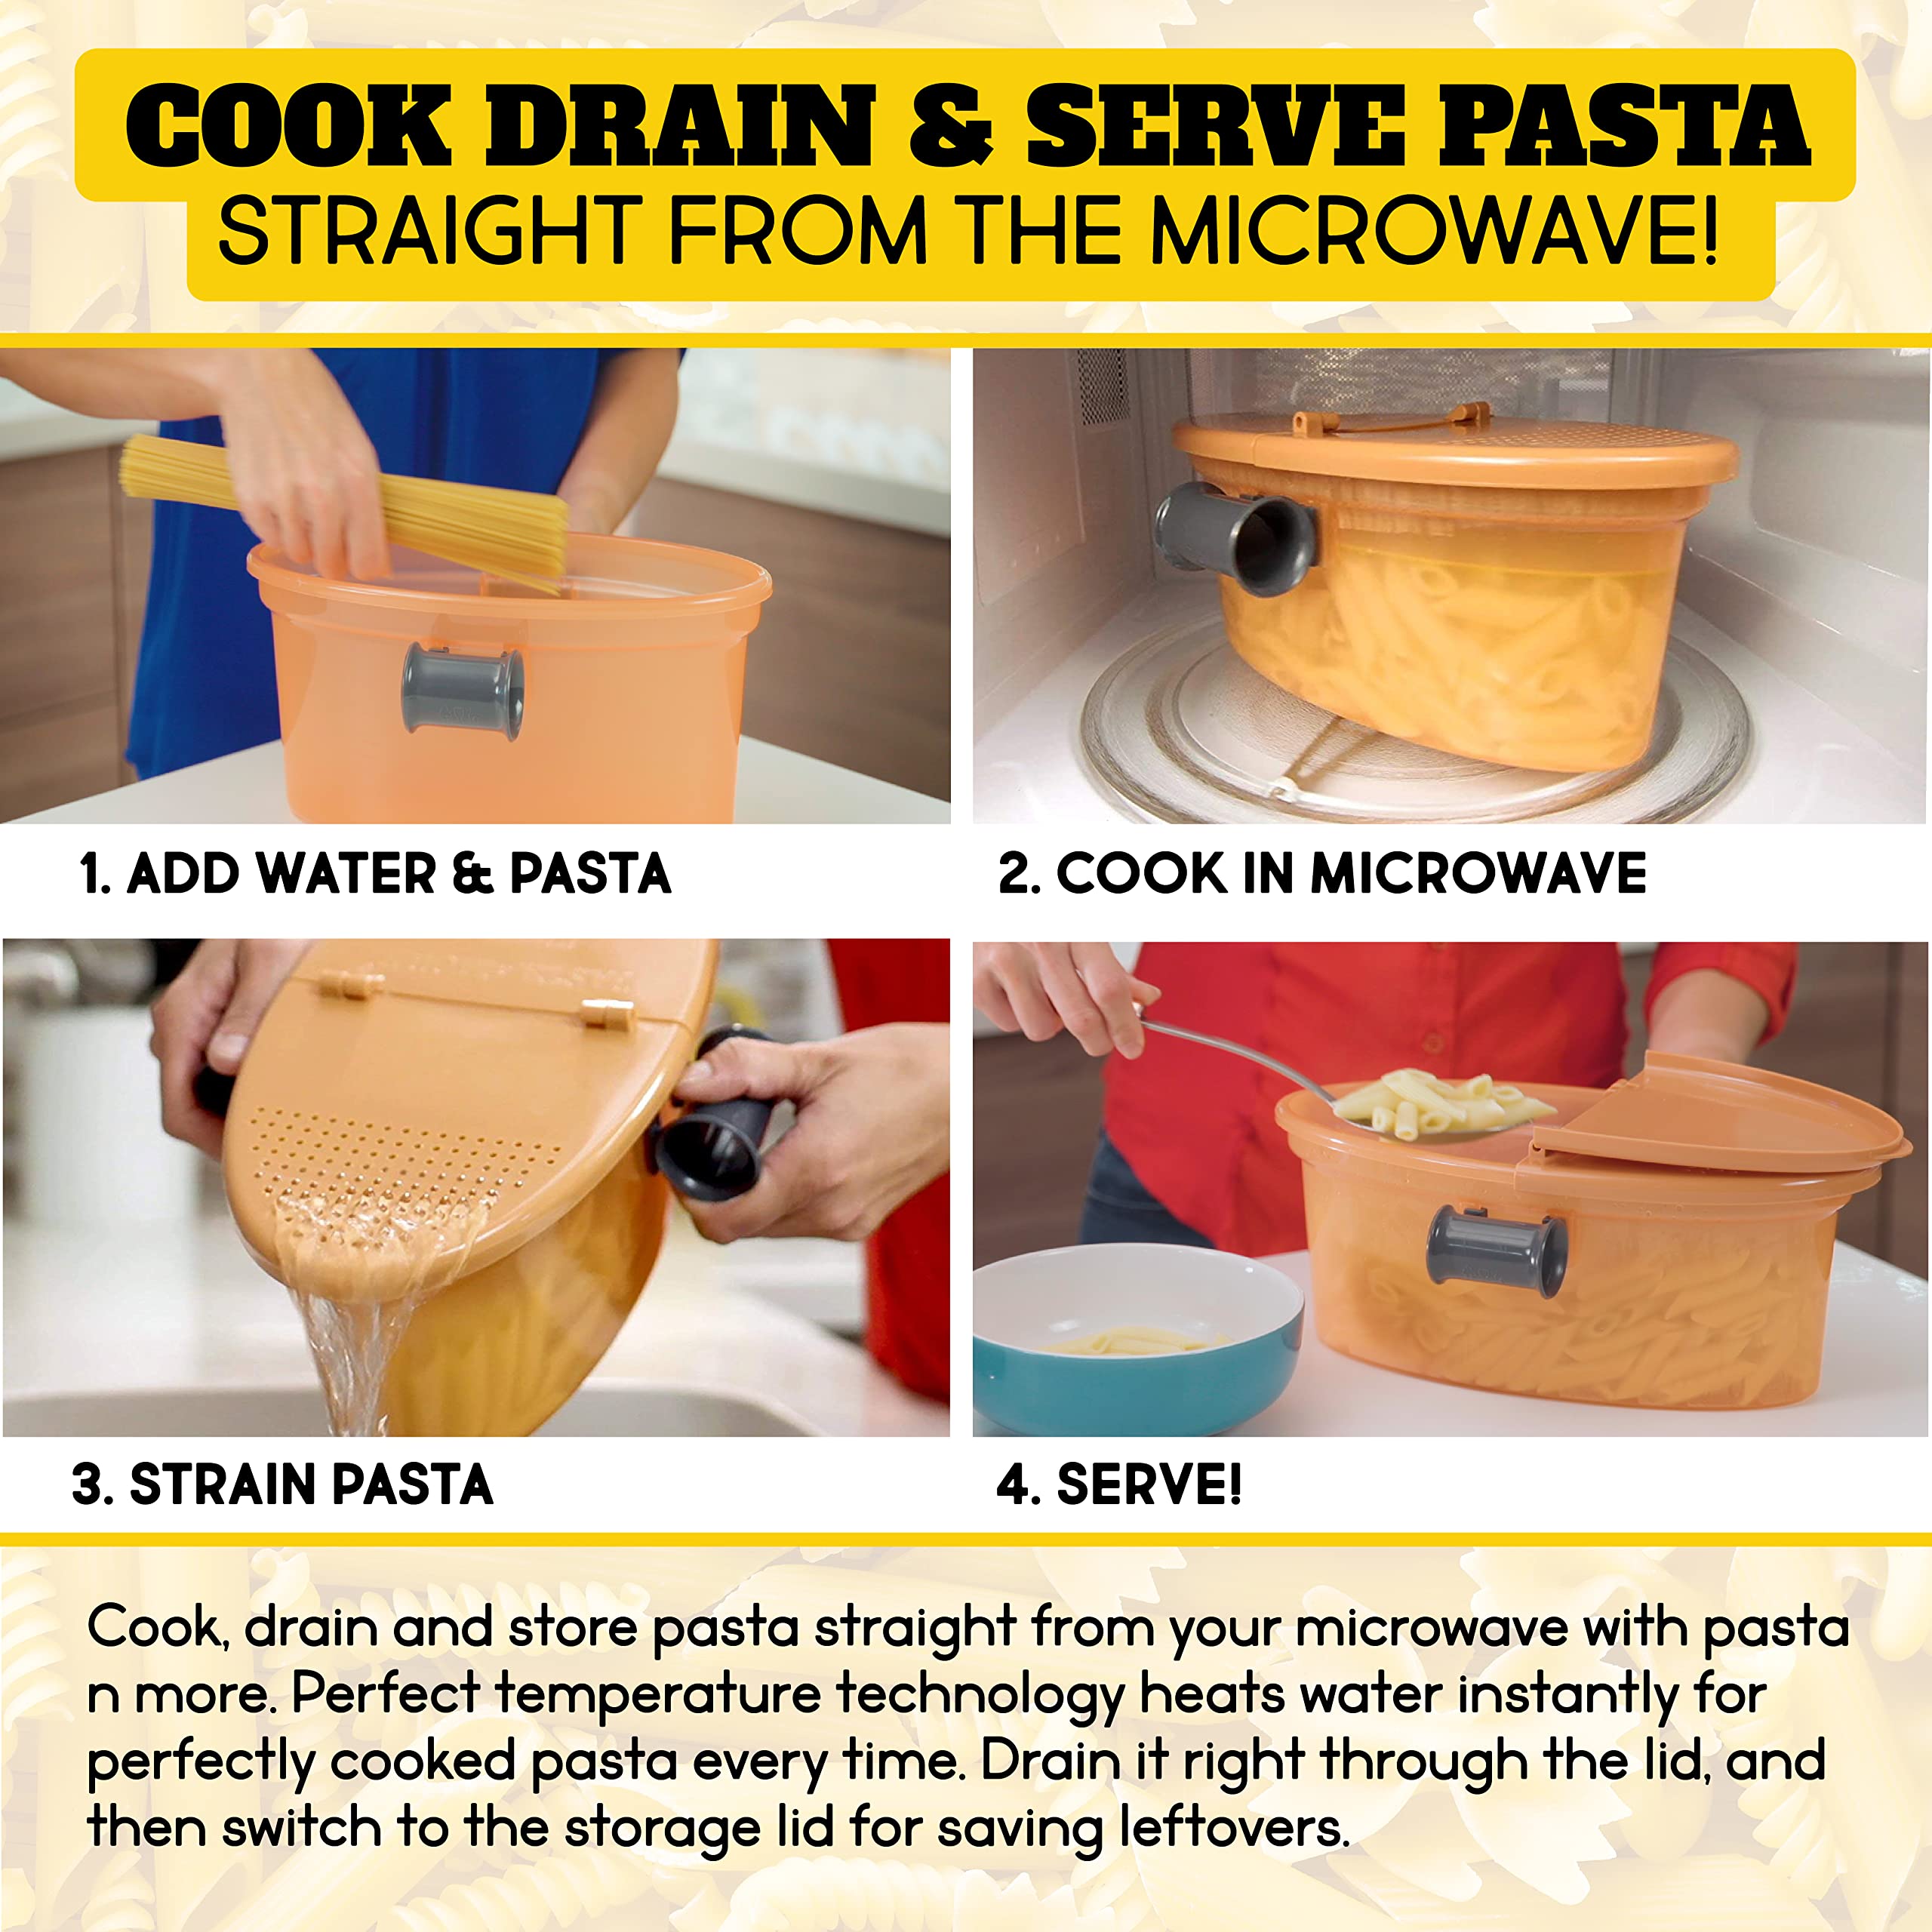 Pasta N More Microwave Cooker with Strainer, All in 1 Microwave Pasta Cooker, Microwave Rice Cooker and Microwave Egg Cooker for Quick Cooking, Nonstick, Dishwasher Safe